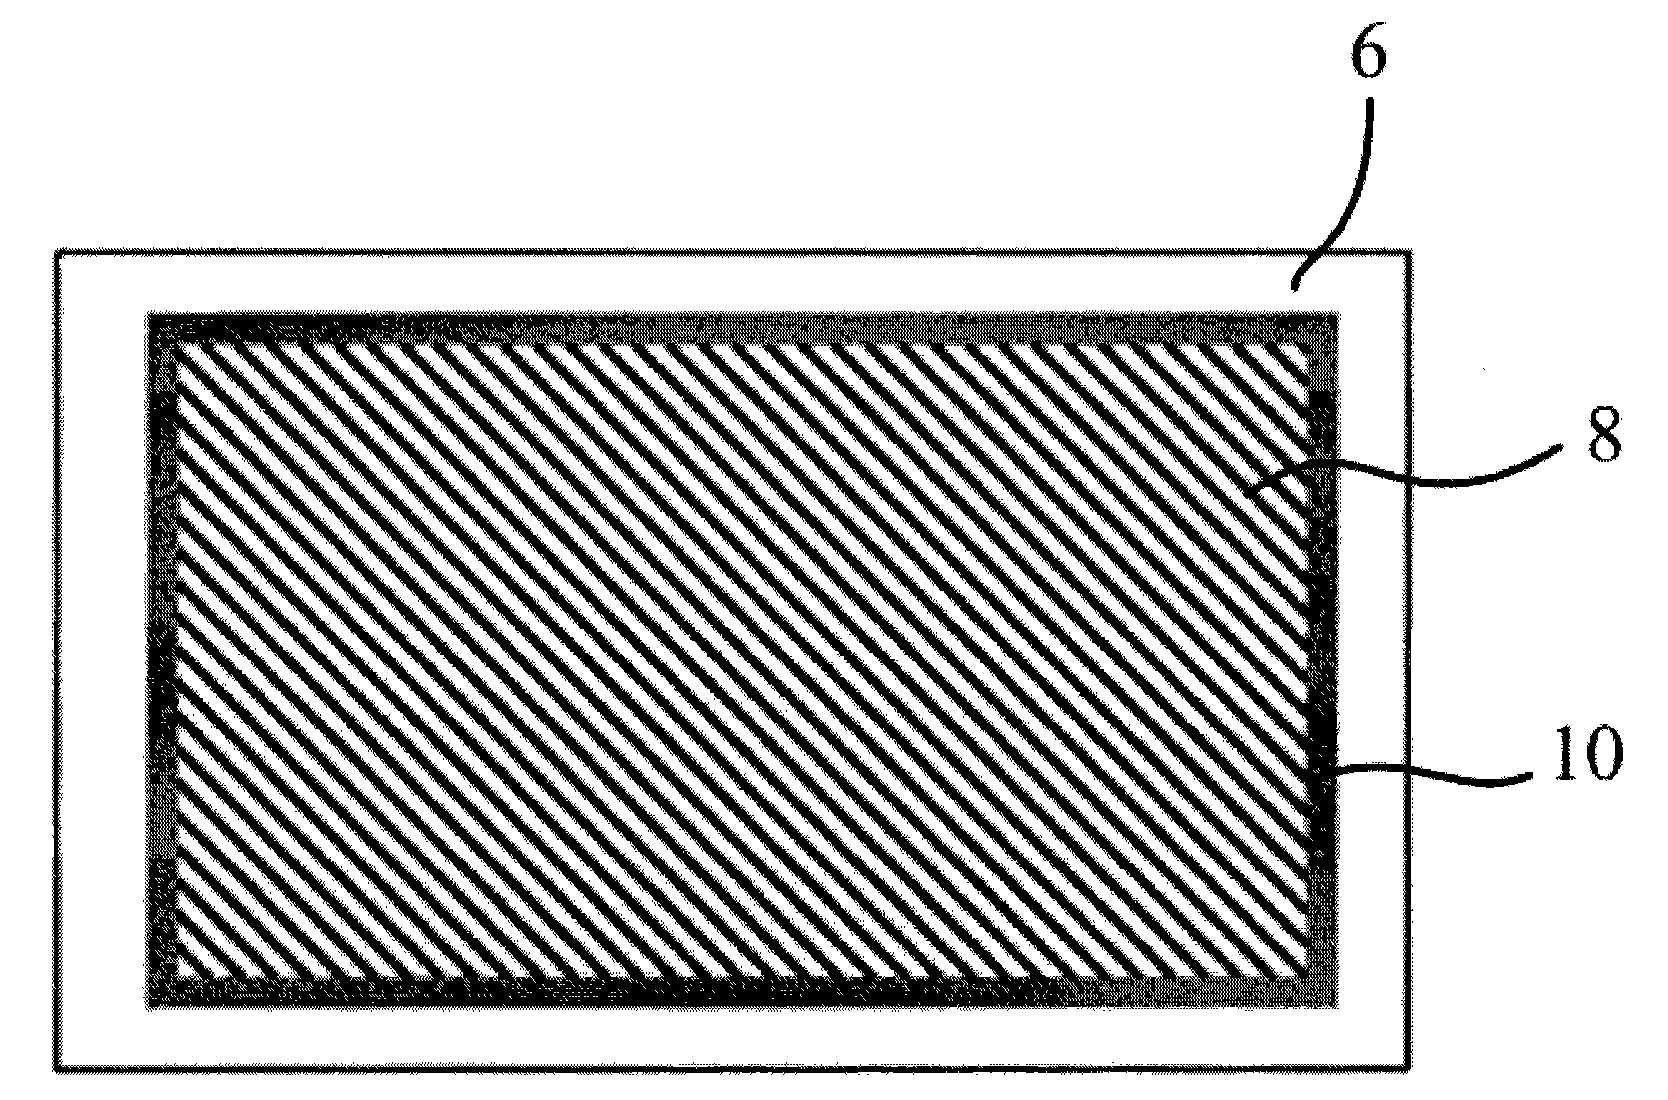 Method for exposing single-sided flexible circuit board